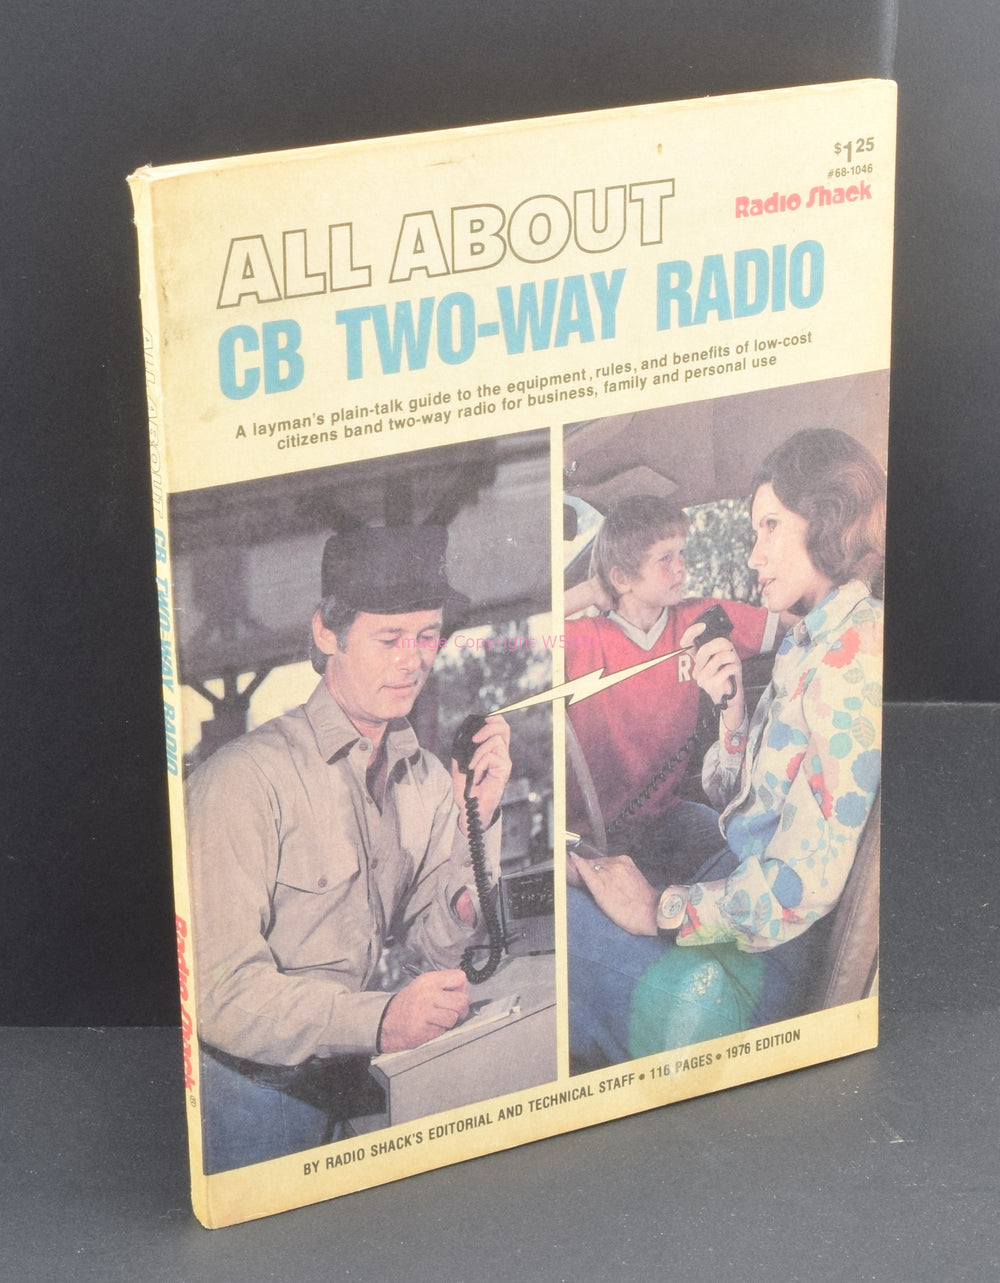 Radio Shack Tandy All About CB Two-Way Radio 1st Edition 1976 - Dave's Hobby Shop by W5SWL